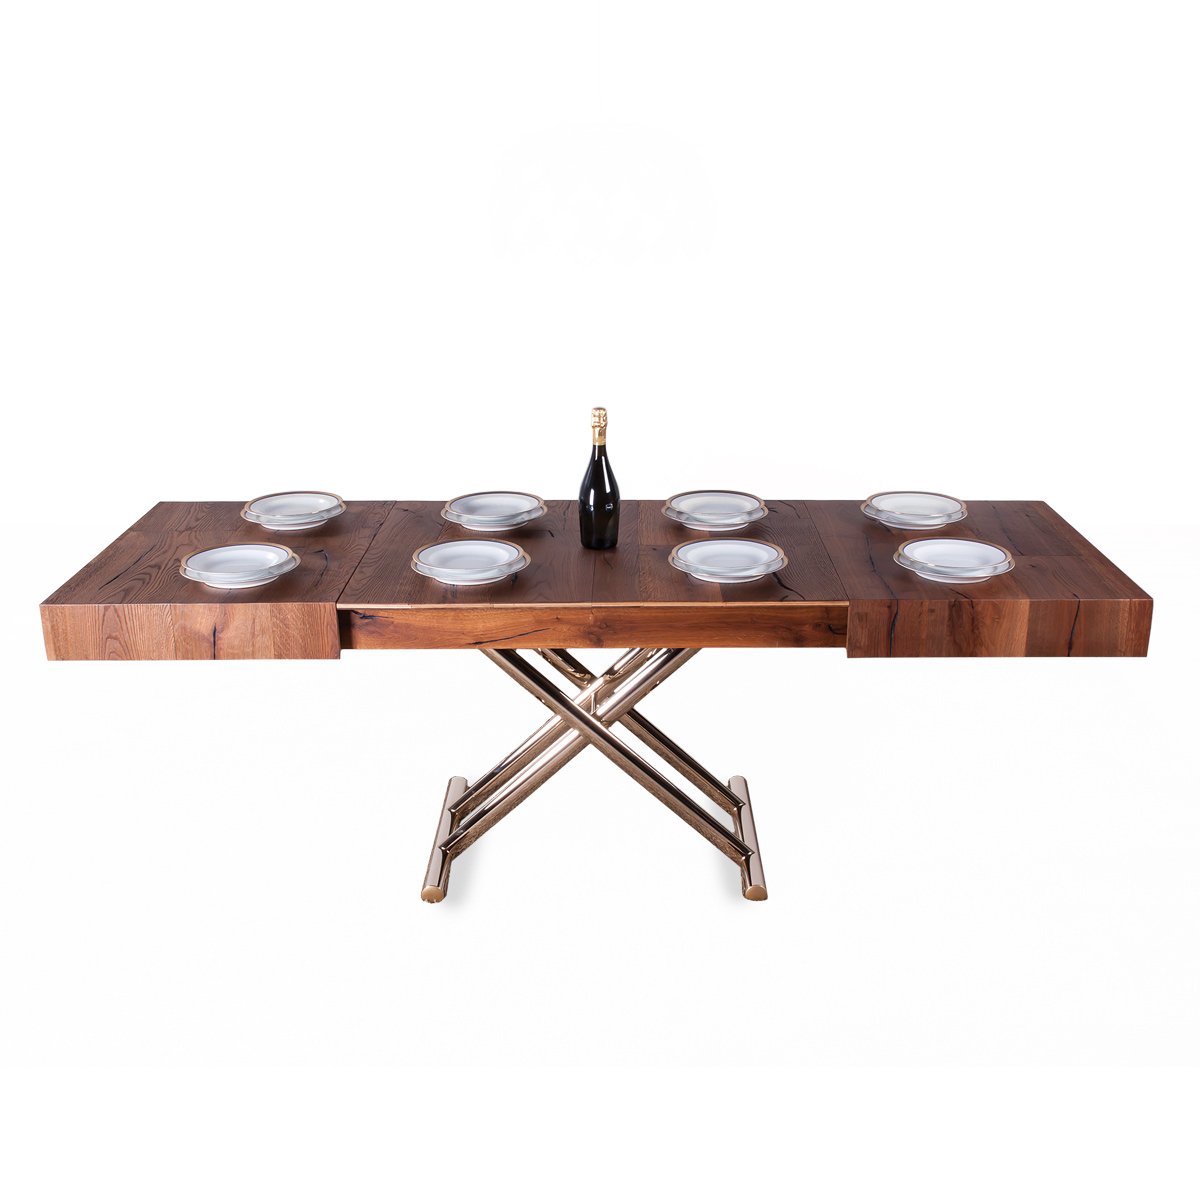 Table basse transformable, convertible, extensible